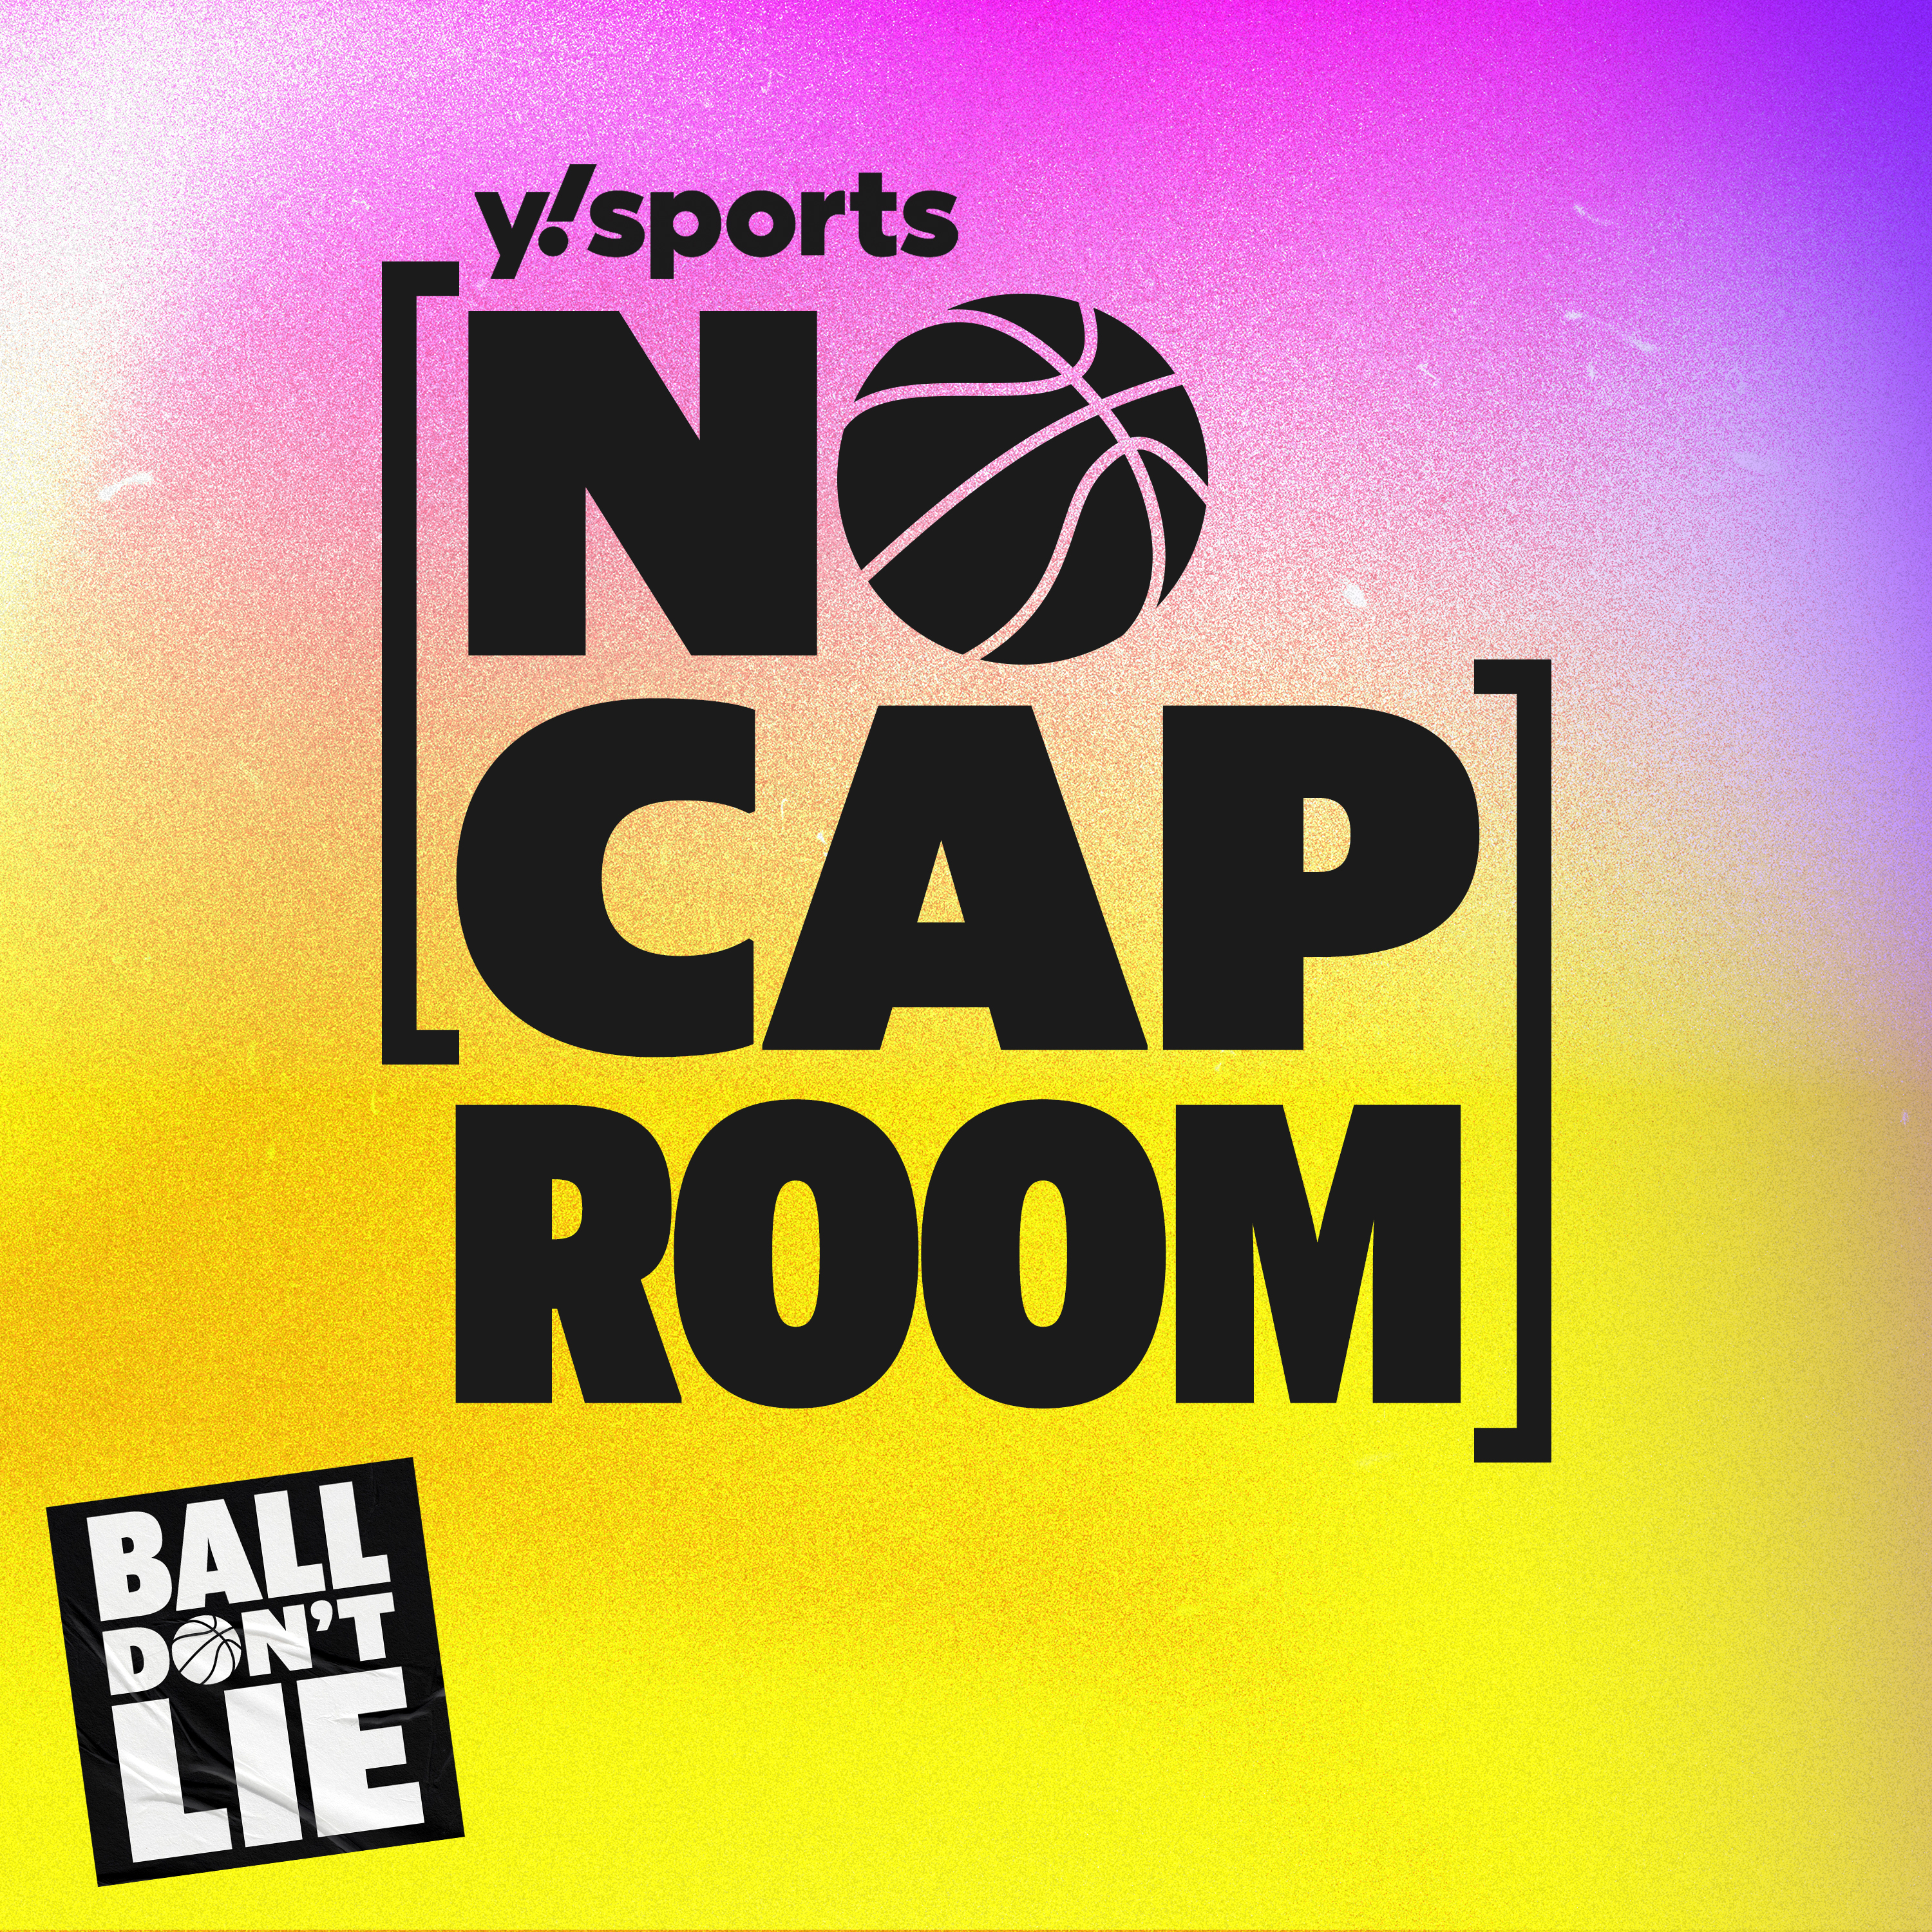 Jrue Holiday’s contract extension, Paolo Banchero comps & playoff legacies on the line | No Cap Room